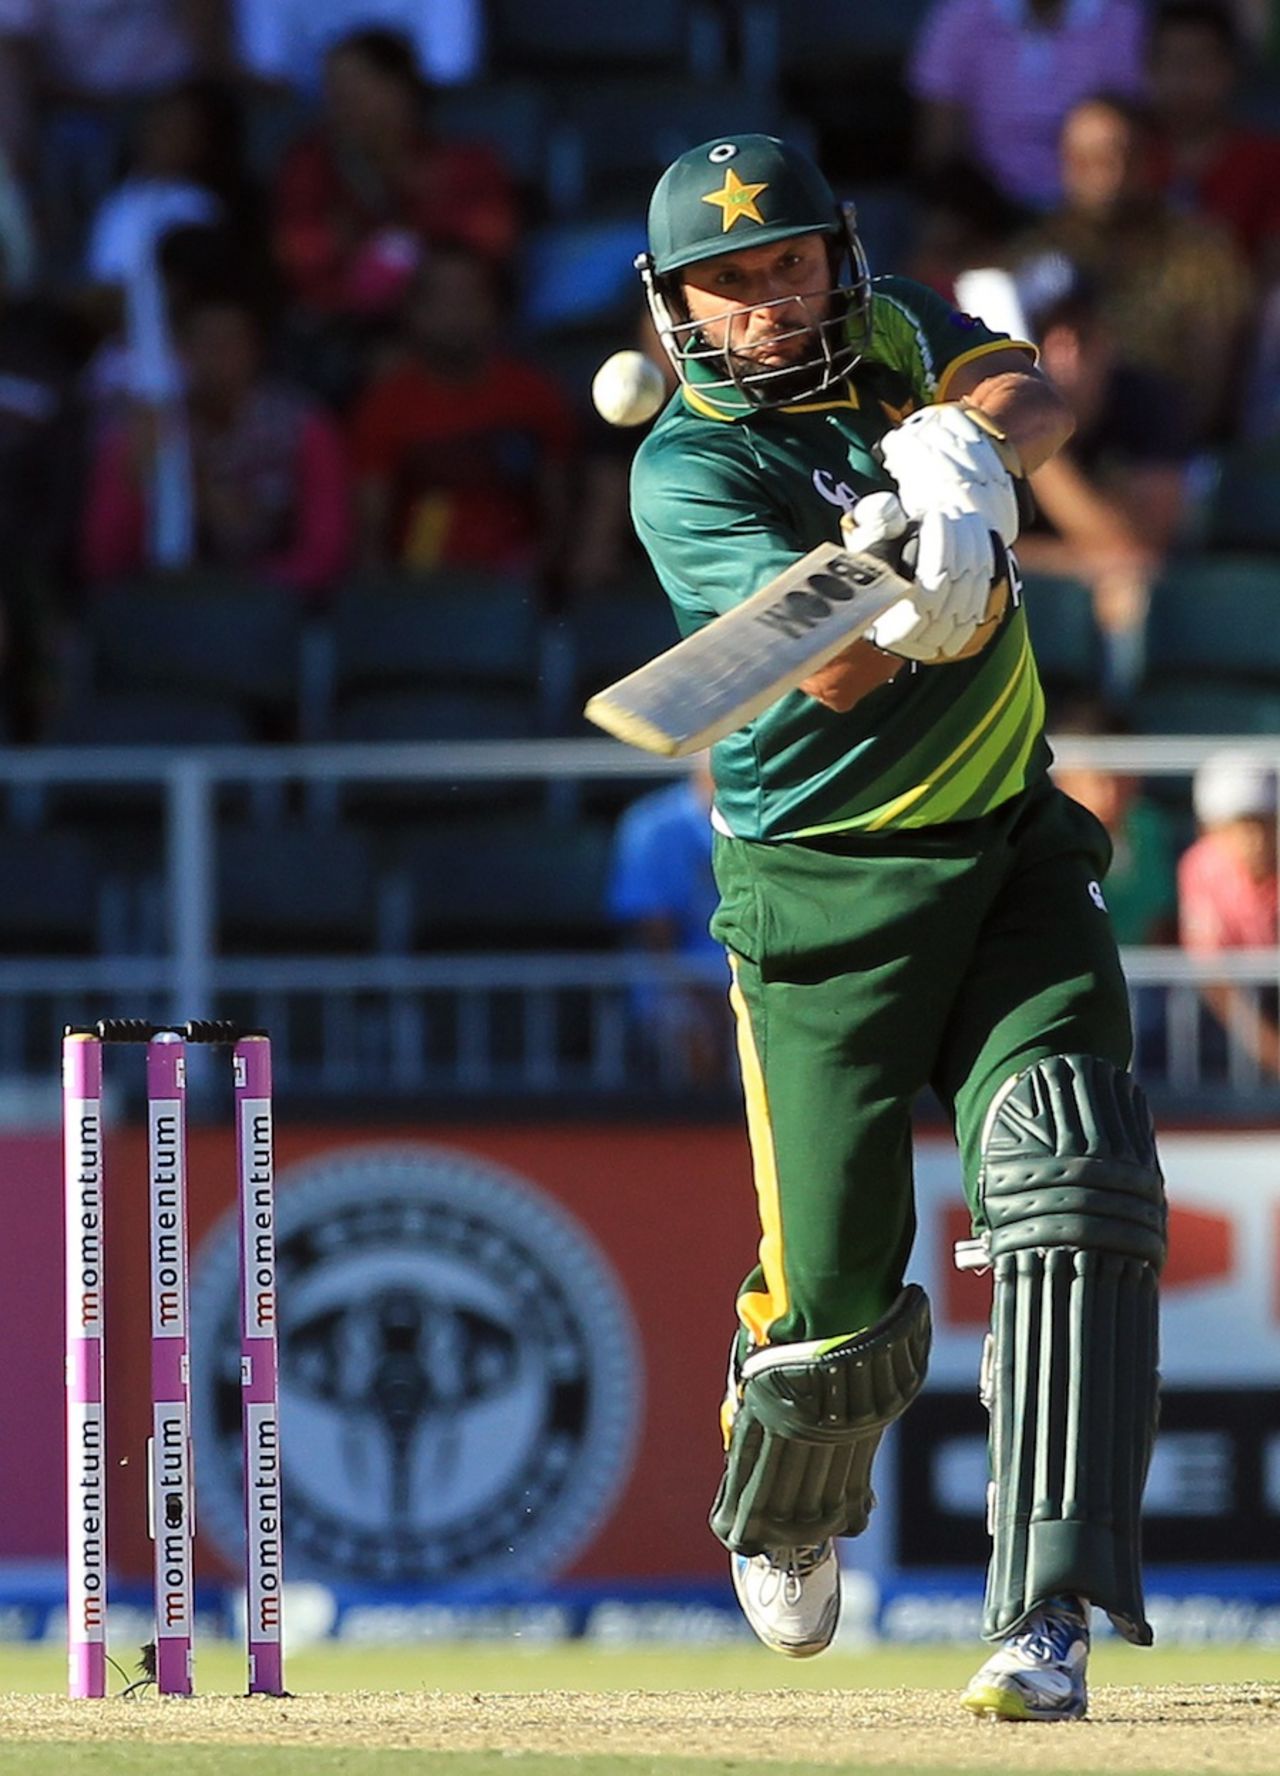 Shahid Afridi smashes the ball, taking the aerial route, South Africa v Pakistan, 3rd ODI, Johannesburg, March 17, 2013